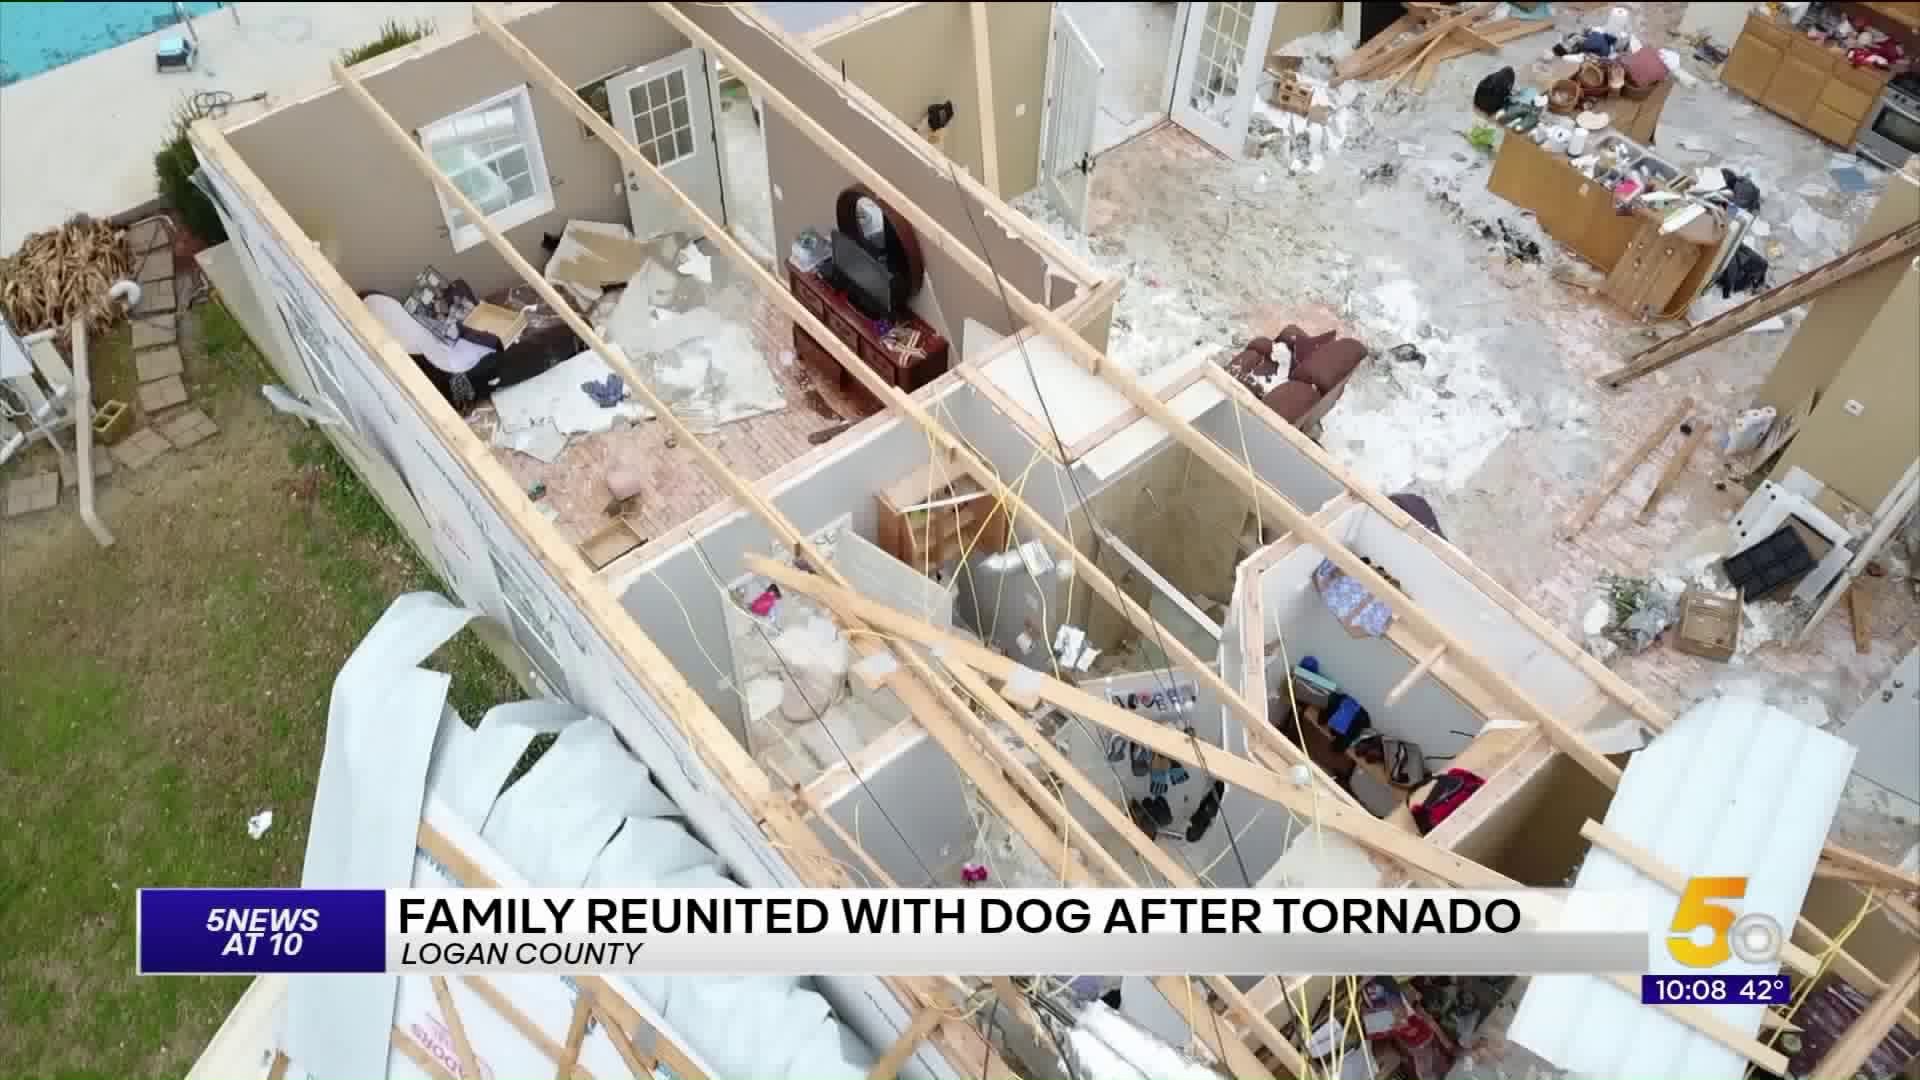 Logan County Family Reunited With Dog After Their Home Was Destroyed During Tornado